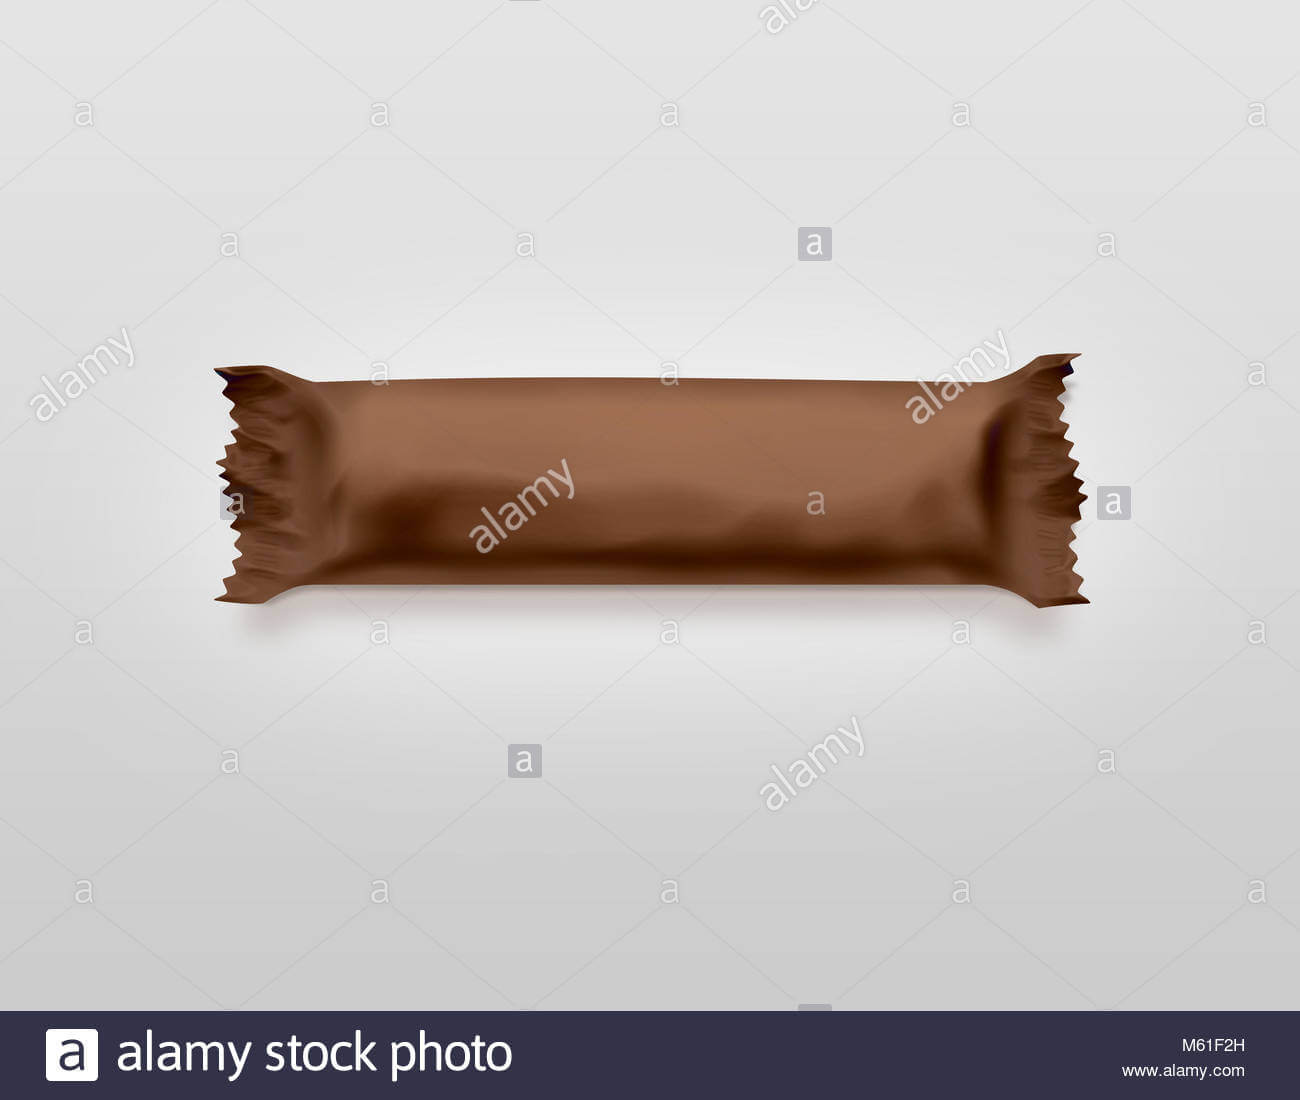 Blank Brown Candy Bar Plastic Wrap Mockup Isolated. Empty With Blank Candy Bar Wrapper Template